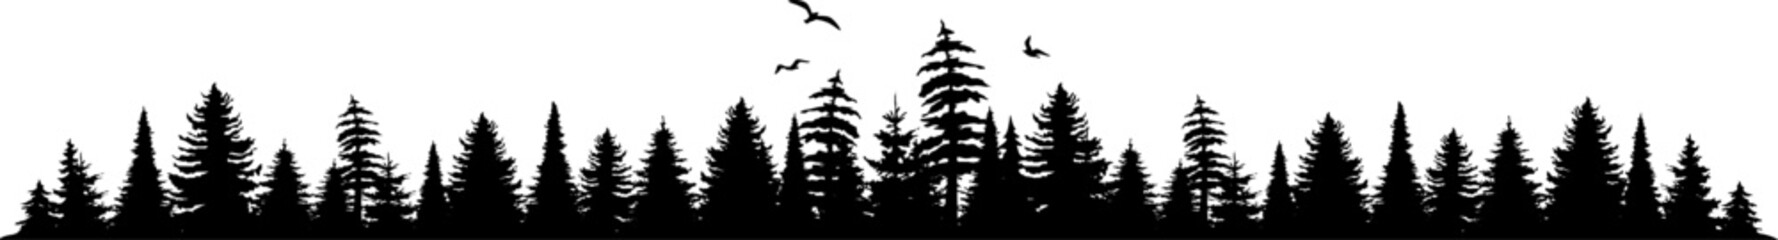 FOREST black silhouette background vector